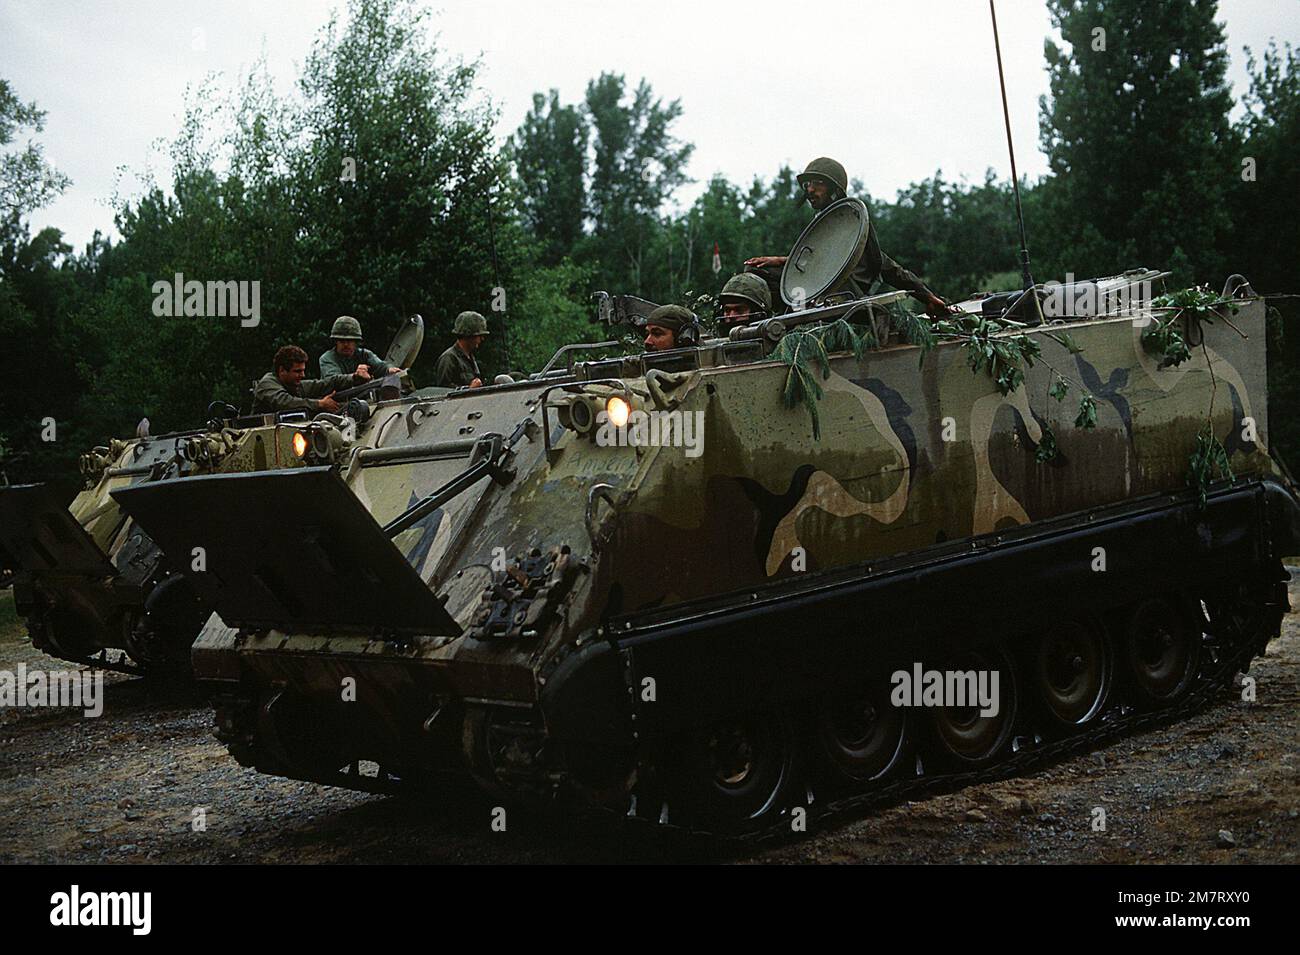 Soldiers aboard an M-113 armored personnel carrier prepare to move out in field practice during Exercise Sentry Castle '81. The soldiers are assigned to the 42nd Infantry Division, U.S. Army. Subject Operation/Series: SENTRY CASTLE '81 Base: Fort Drum State: New York (NY) Country: United States Of America (USA) Stock Photo